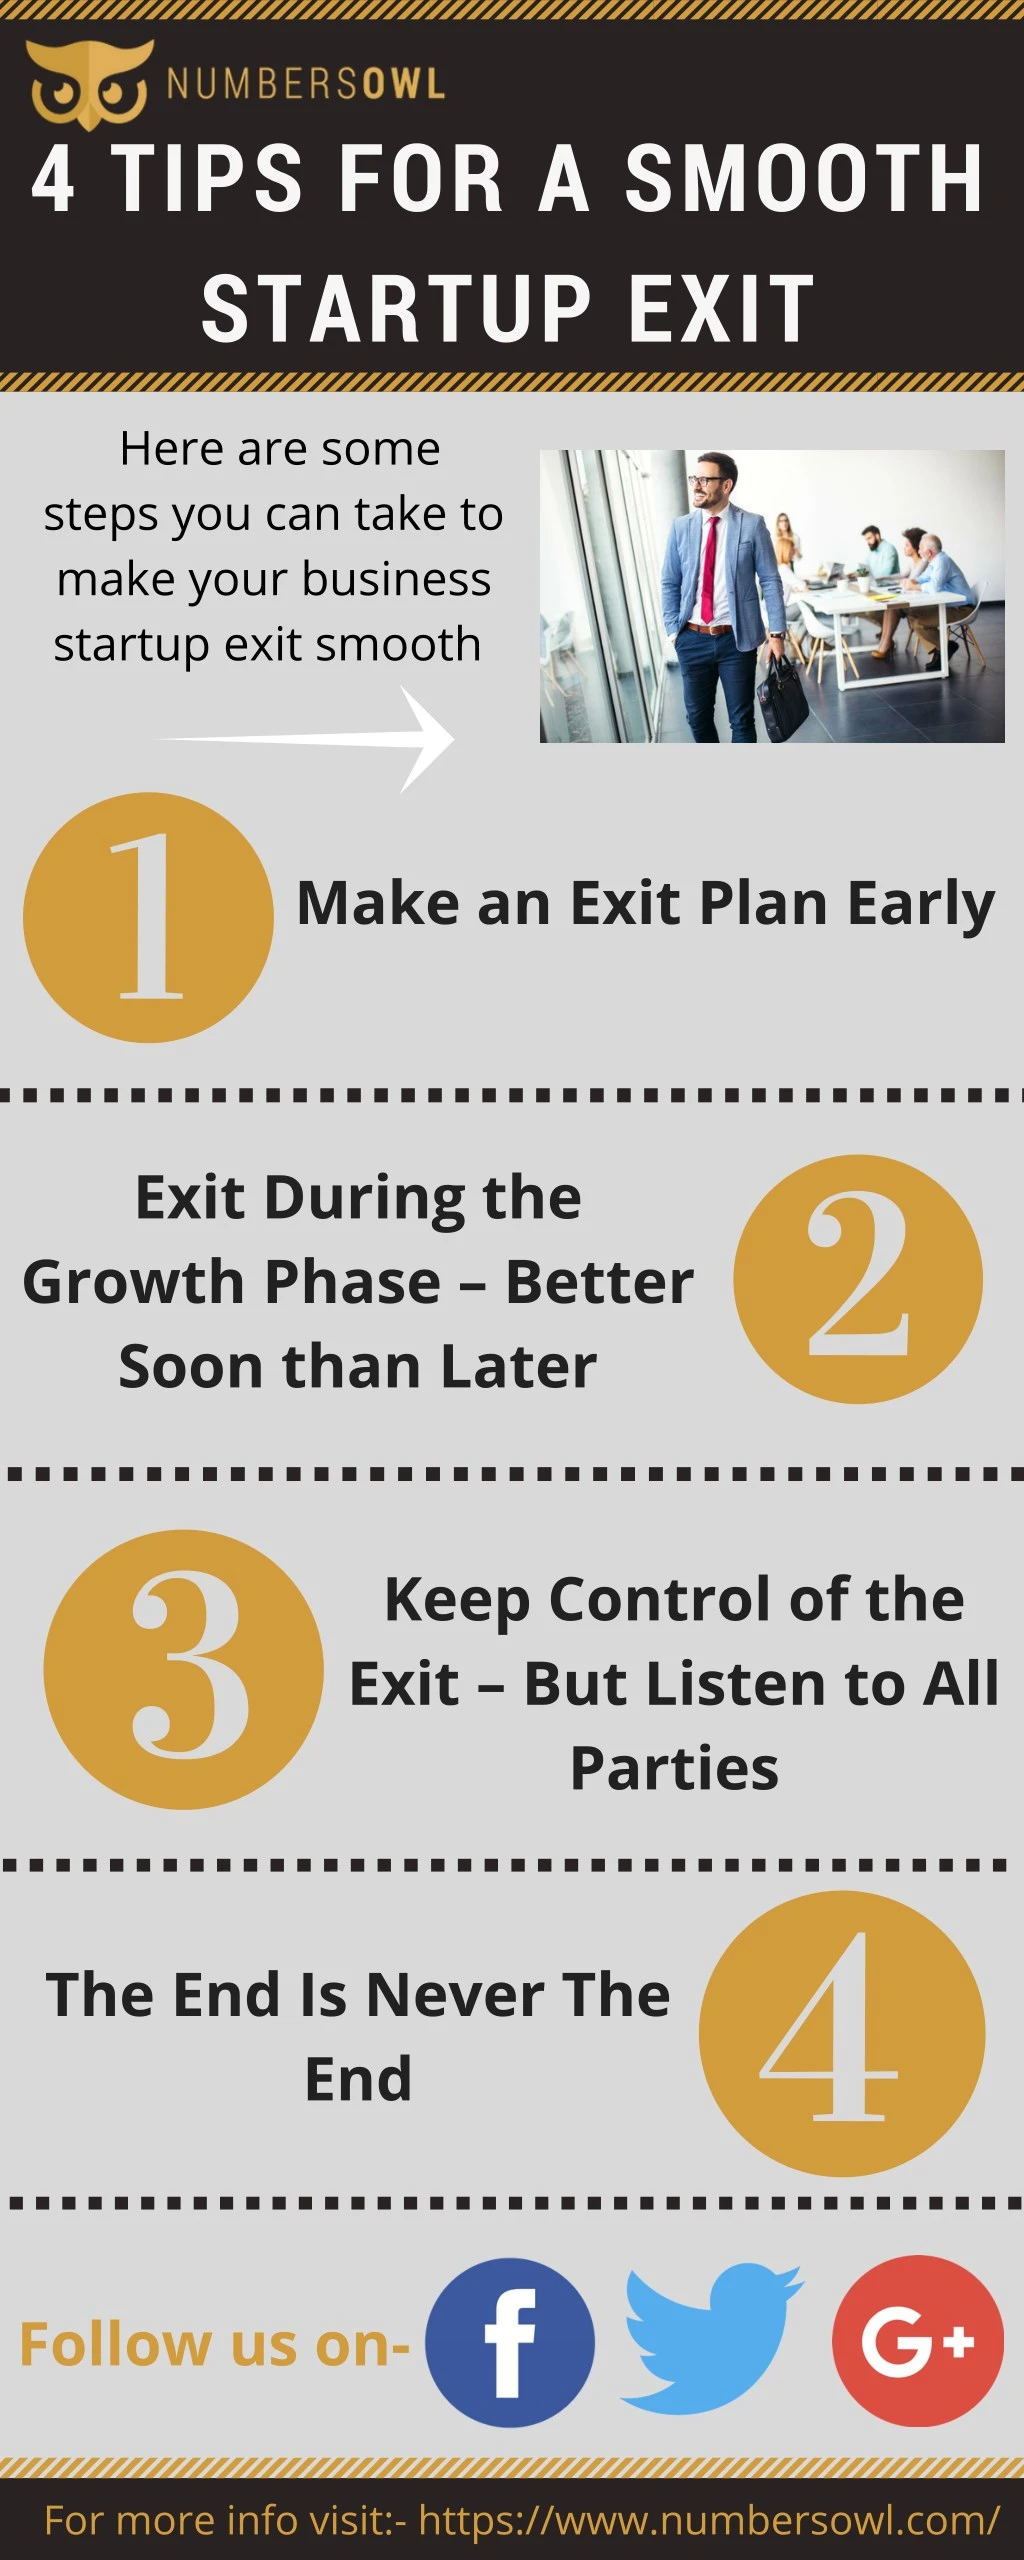 4 tips for a smooth startup exit